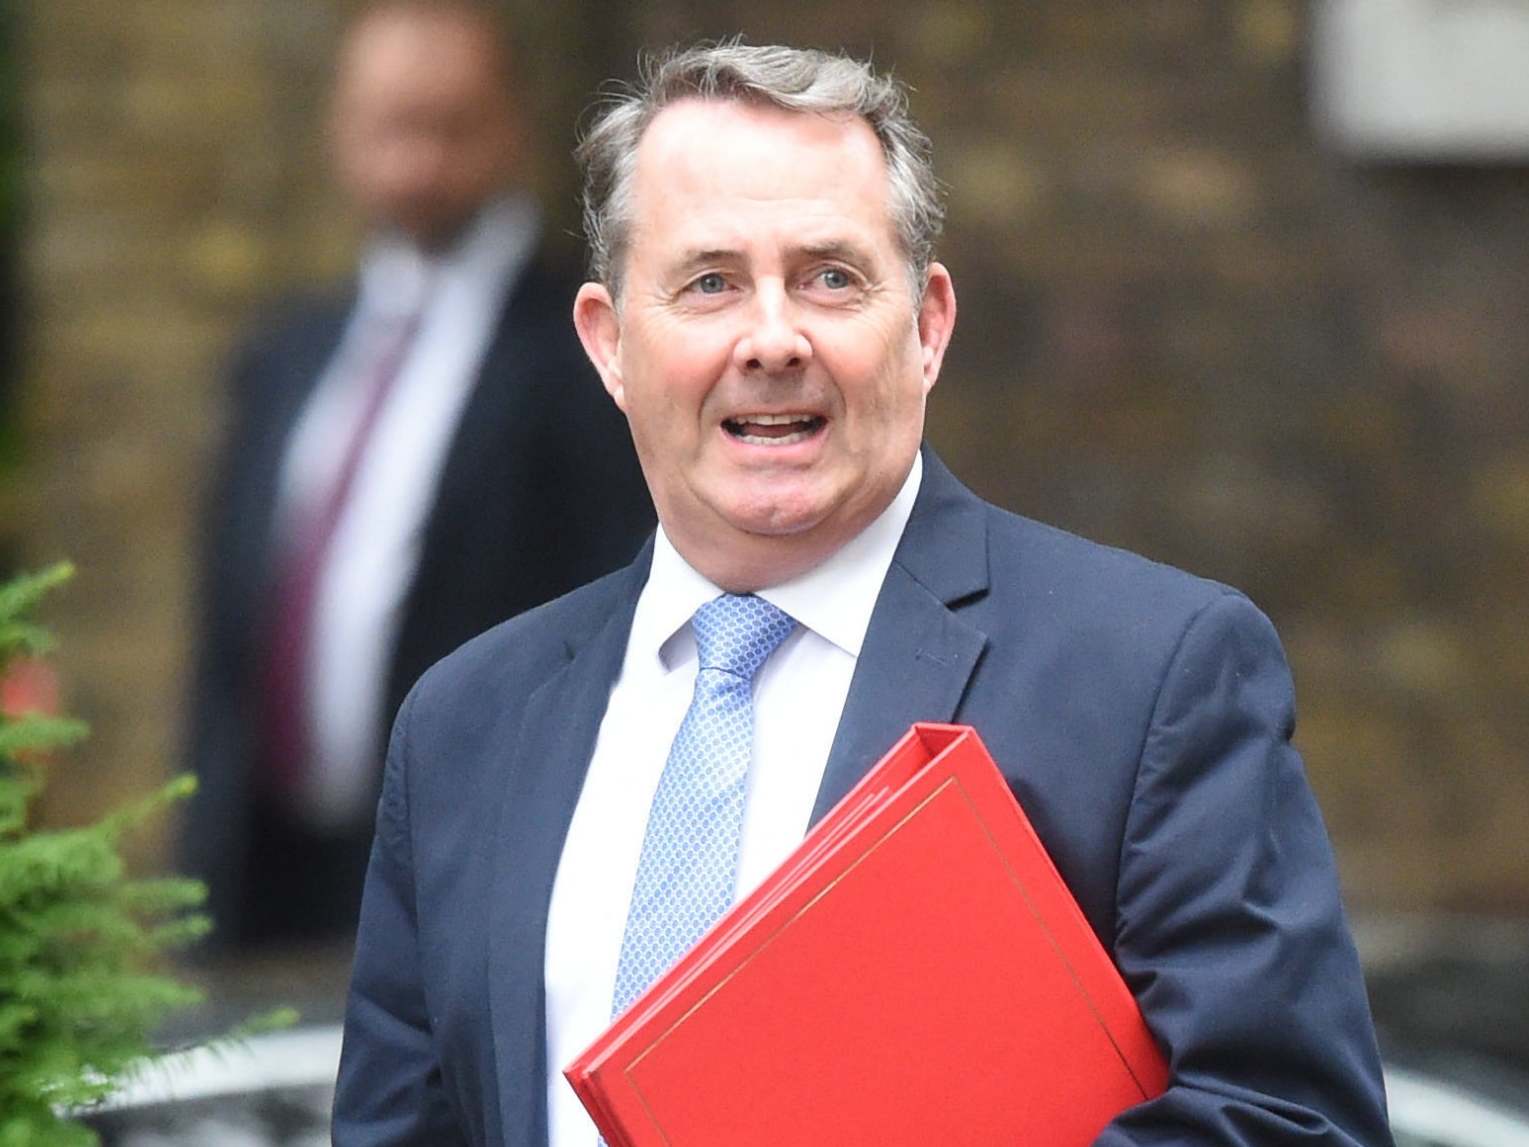 Liam Fox said it was important to take decisions in the best interest of the country.